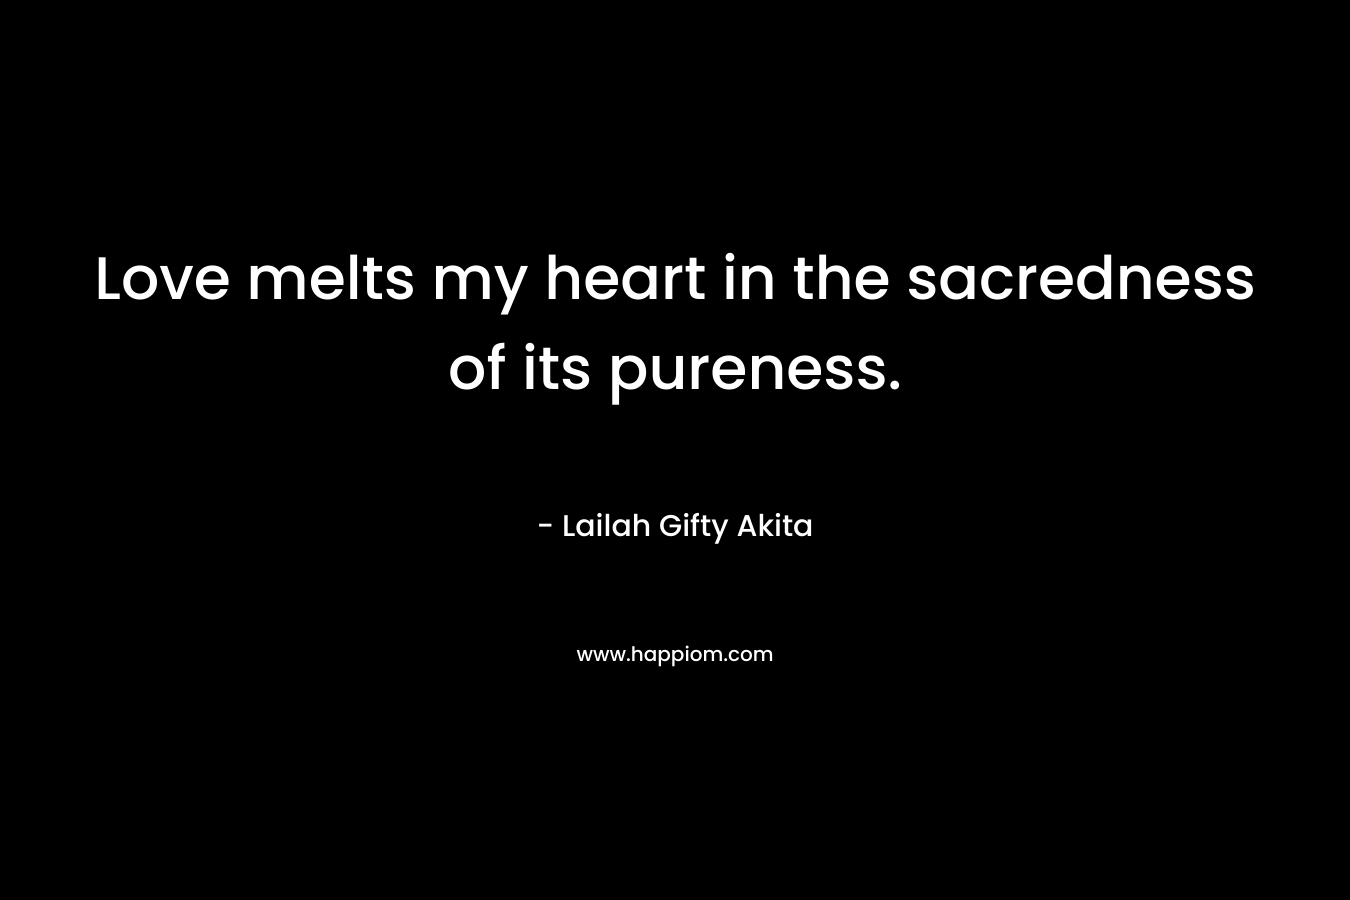 Love melts my heart in the sacredness of its pureness.